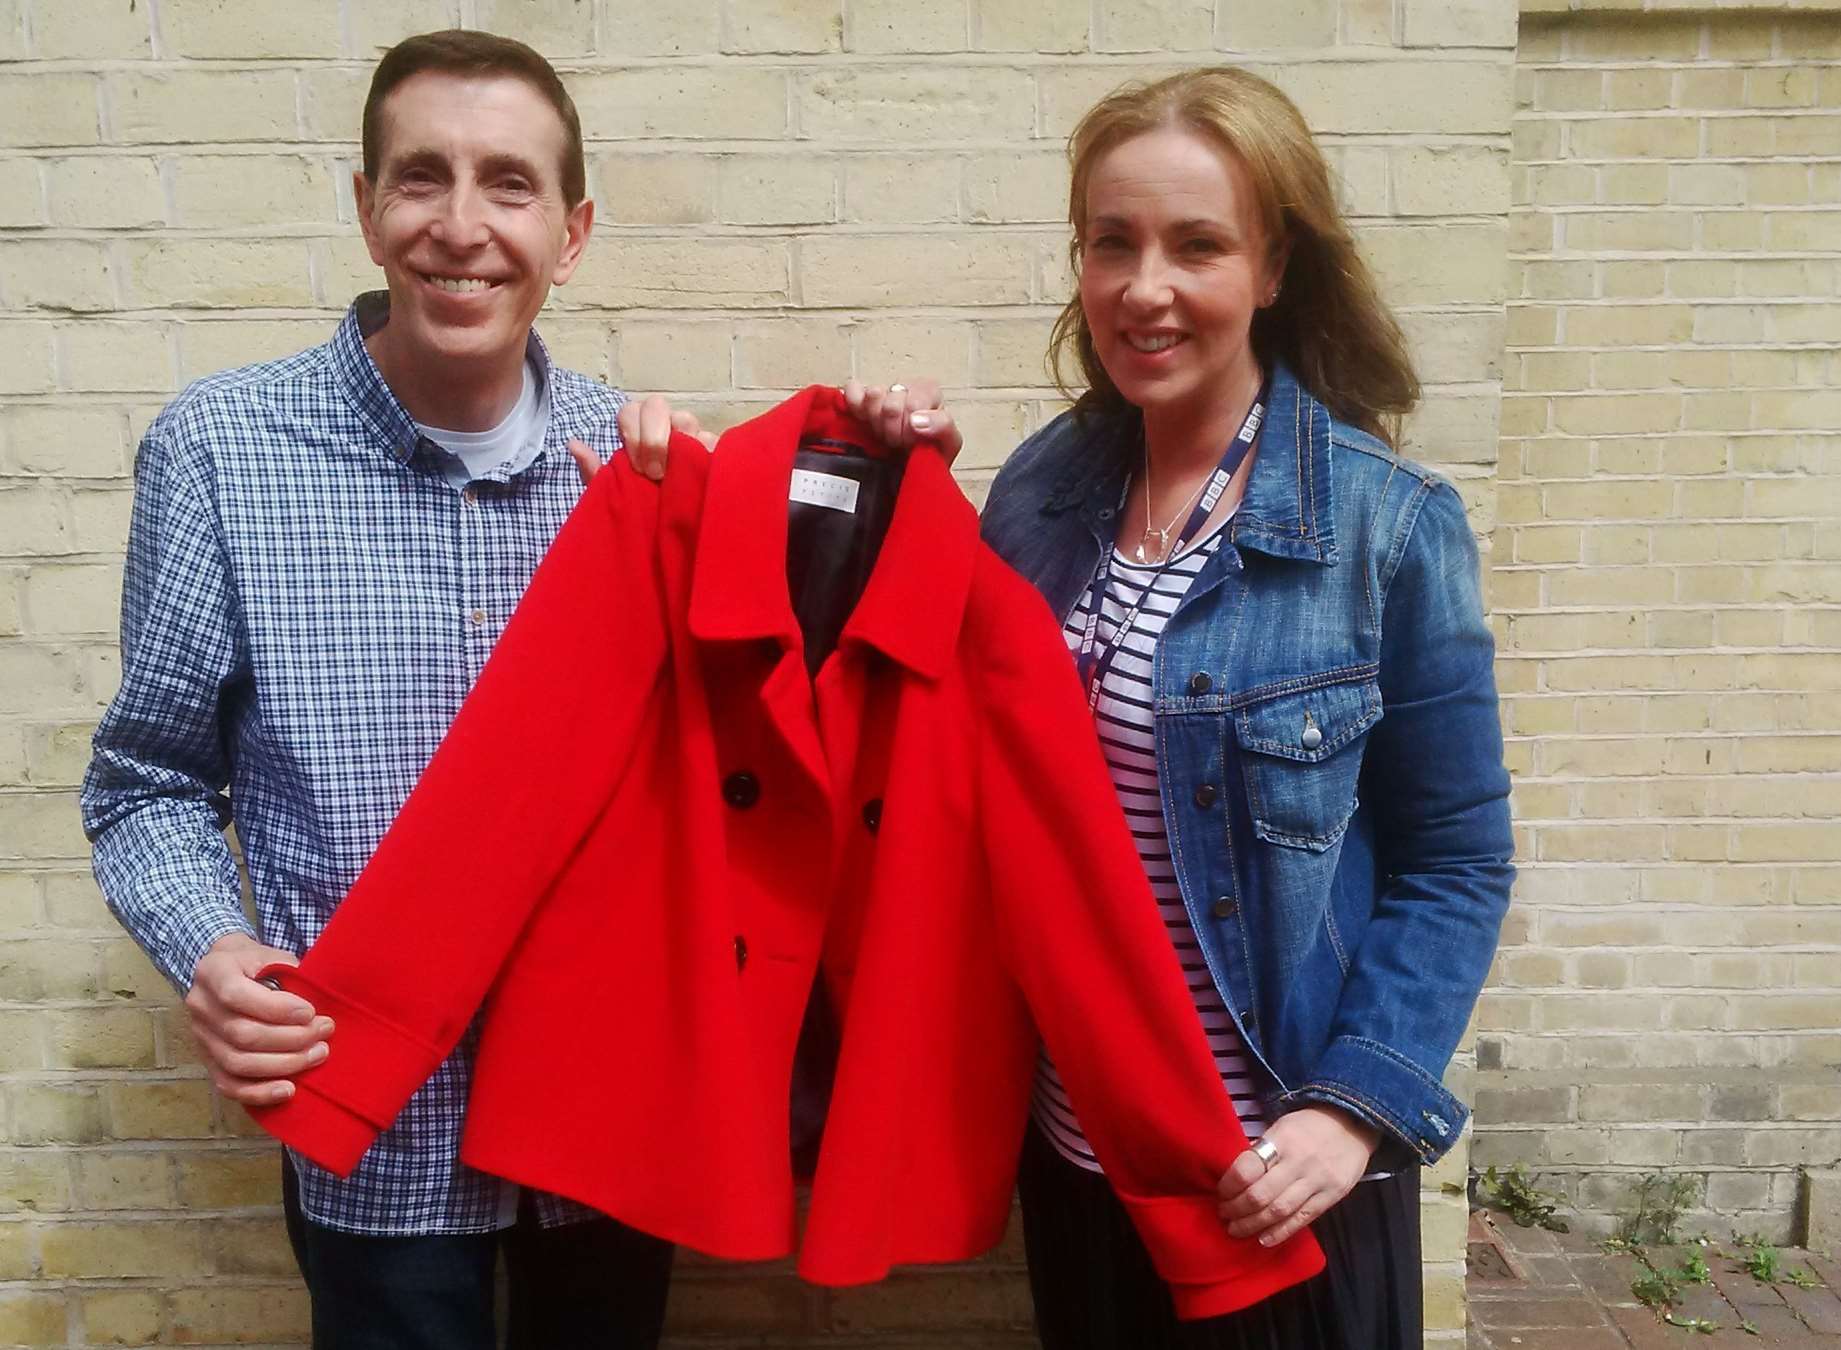 Radio presenter Erika North is trying to track down a lady who gave up her red coat to help her injured mother at the roadside. Picture: Erika North